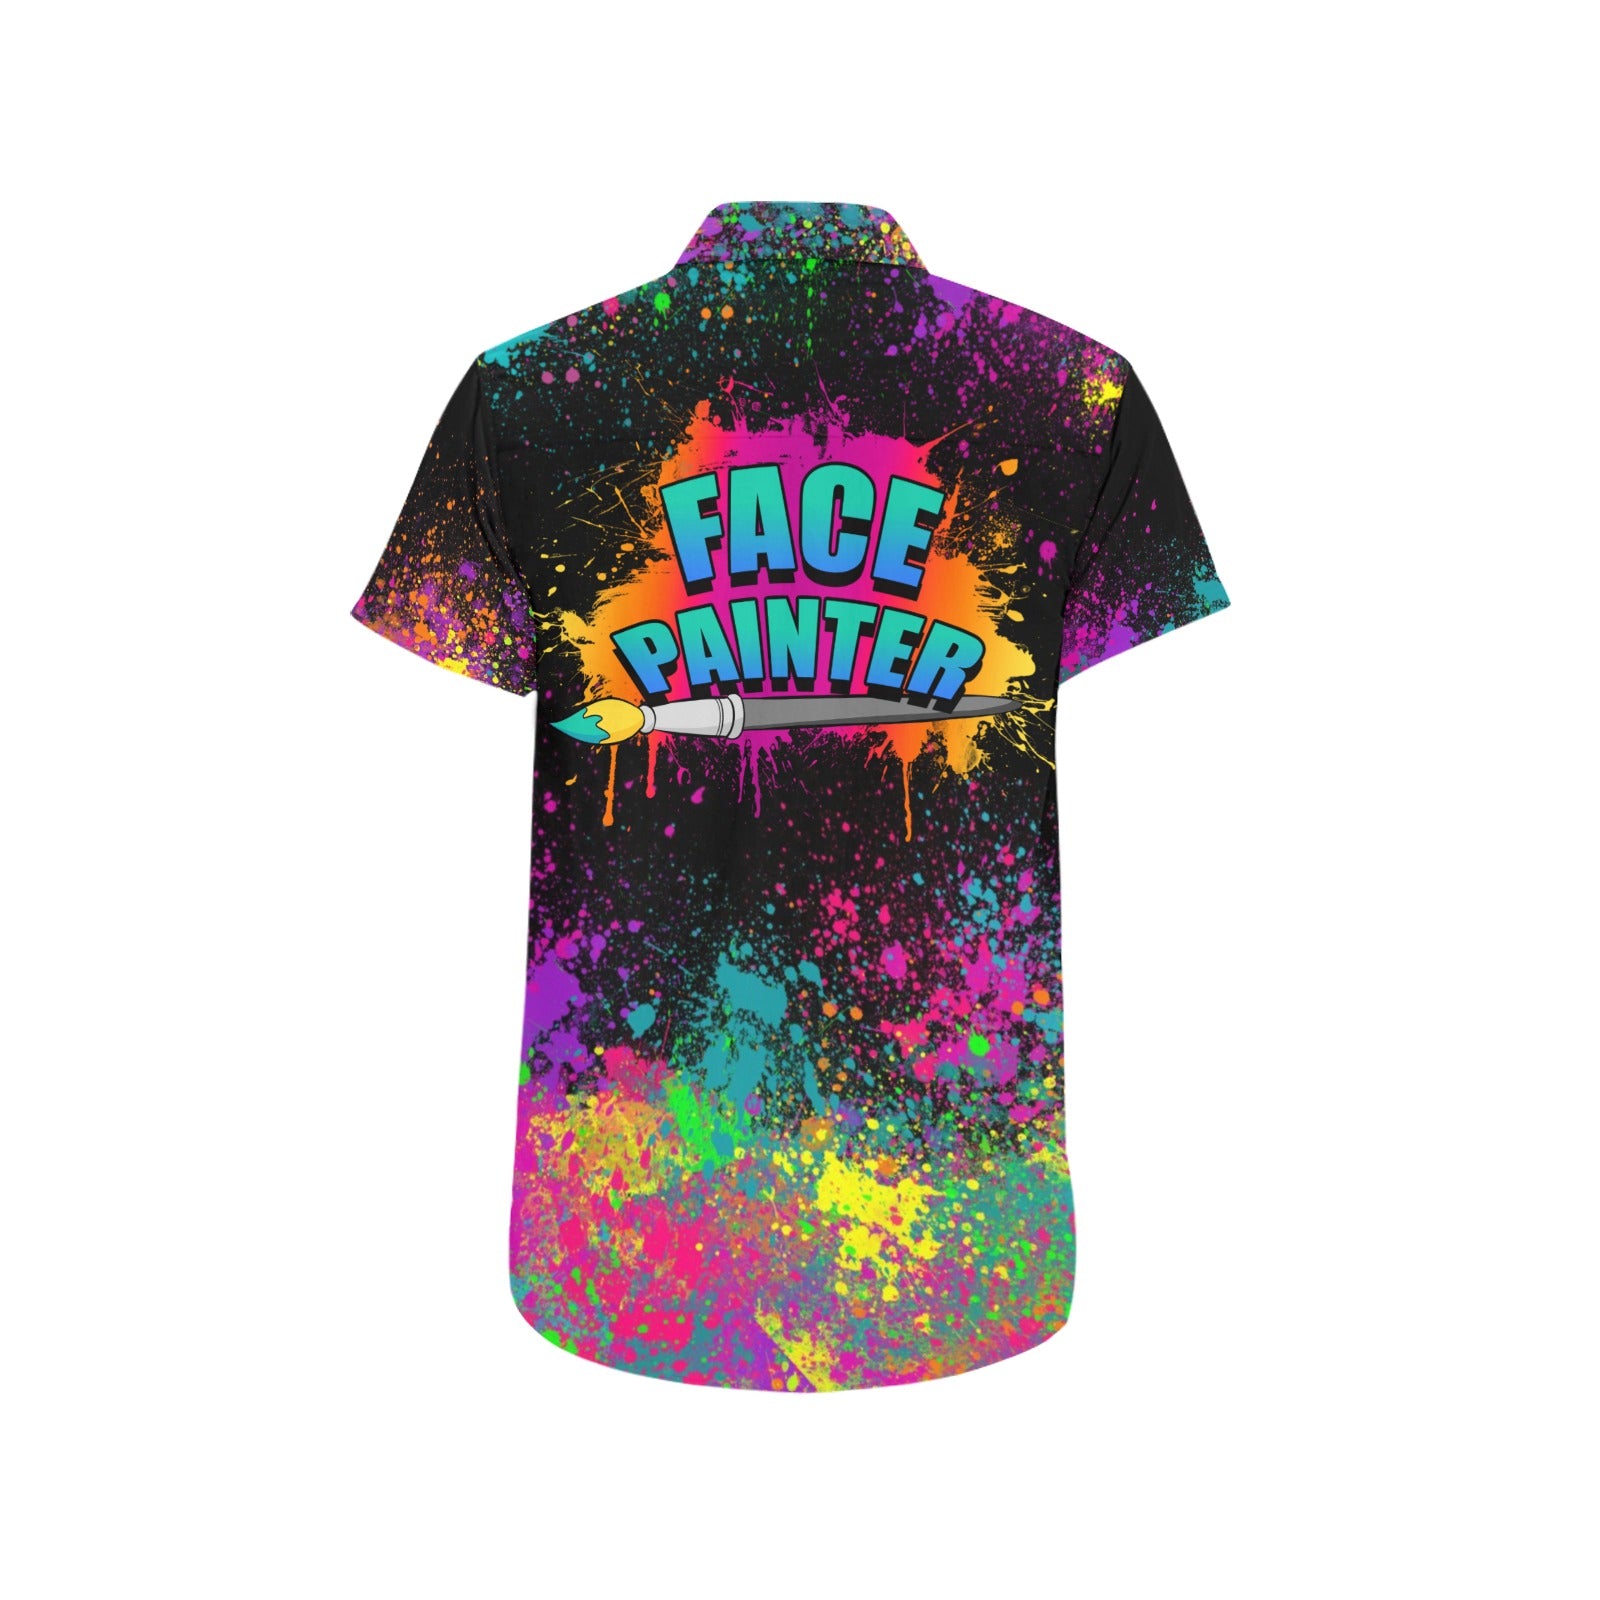 Face Painter Party Shirt with paint splatter on black